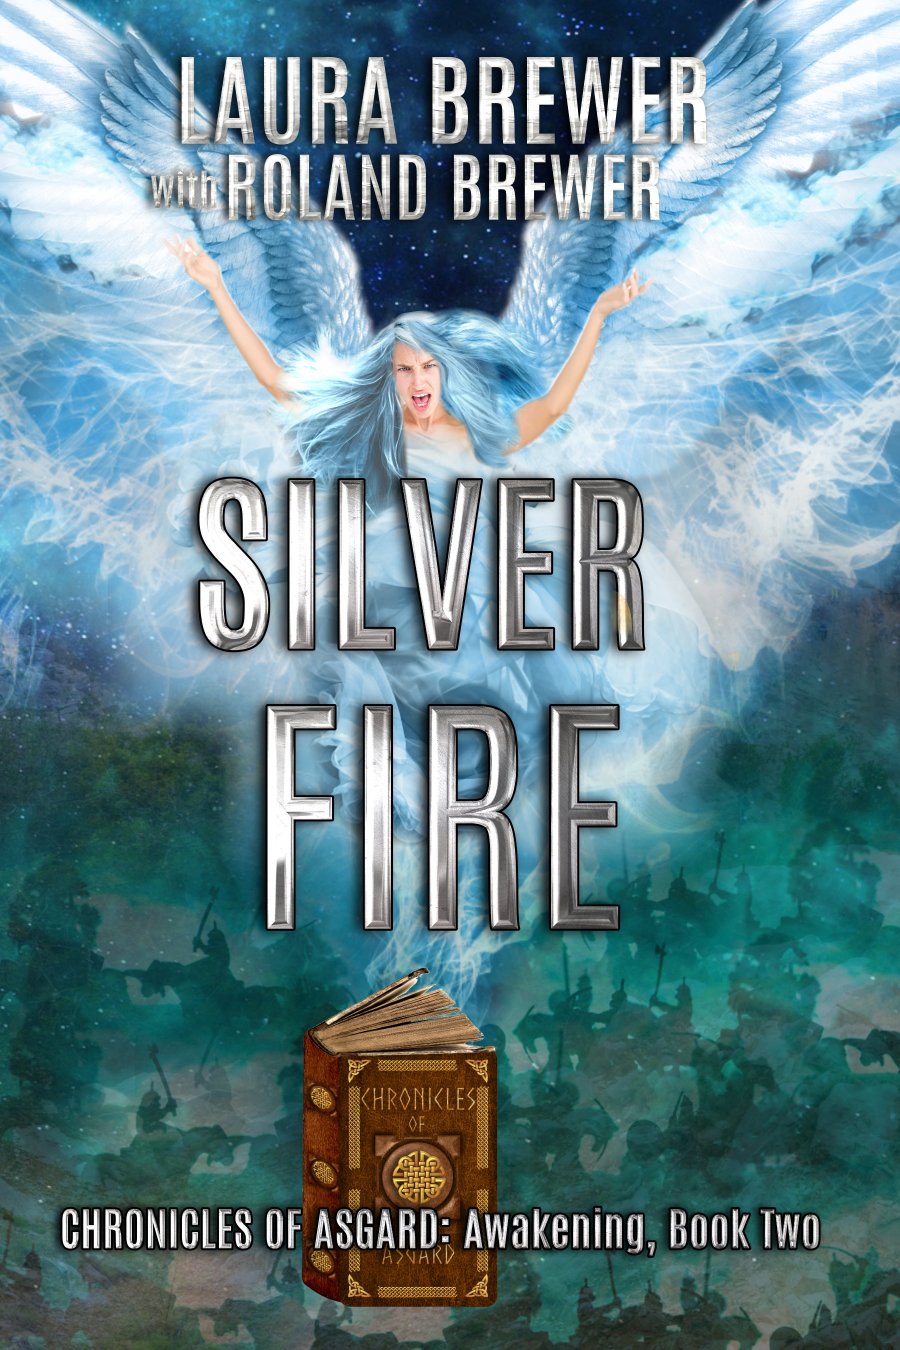 Silver Fire by Laura and Roland Brewer, Chronicles of Asgard: Awakening, Book Two. A Norse-mythology inspired Christian slice-of-life X gamelit epic fantasy. Shows a woman with white fiery wings rising above a battlefield.